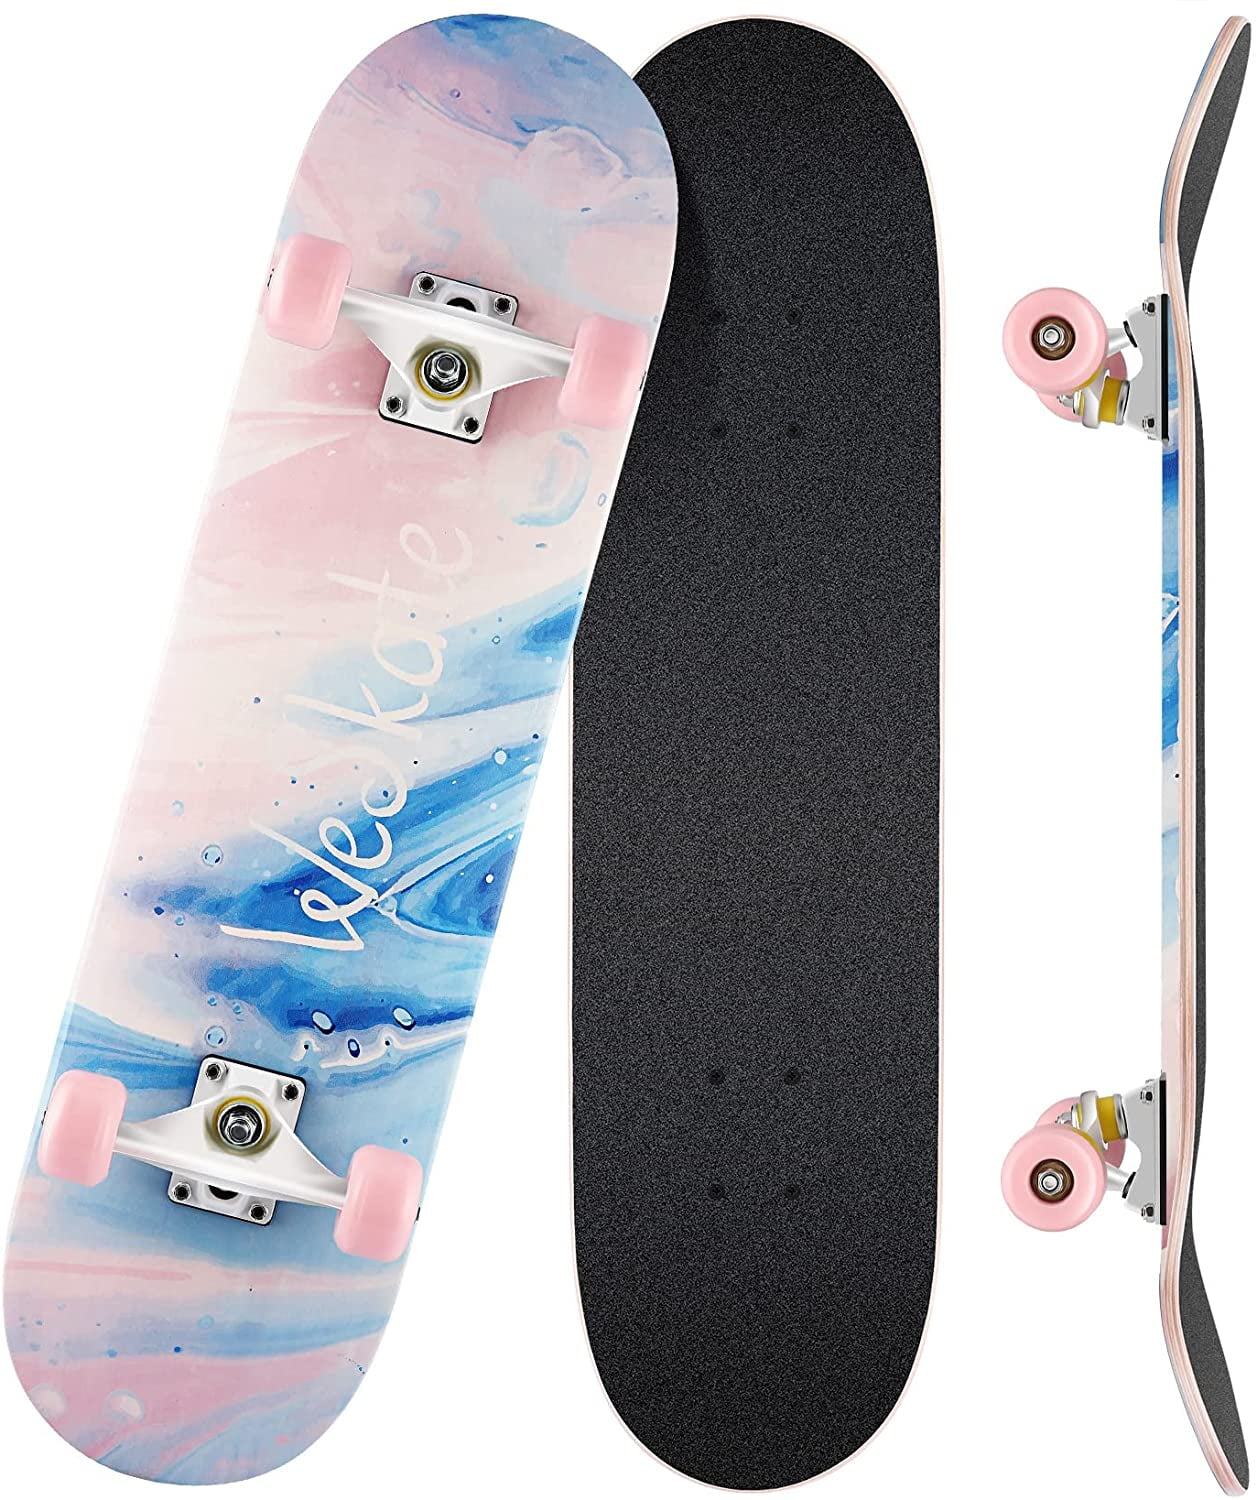 Wood Double Kick Concave Skate Board for Girls Boys Teens Adults with All-in-One Skate T-Tool 31 x 8Standard Skateboard for Kids Complete Skateboards for Beginners 8 Layer Maple Pro Cruiser